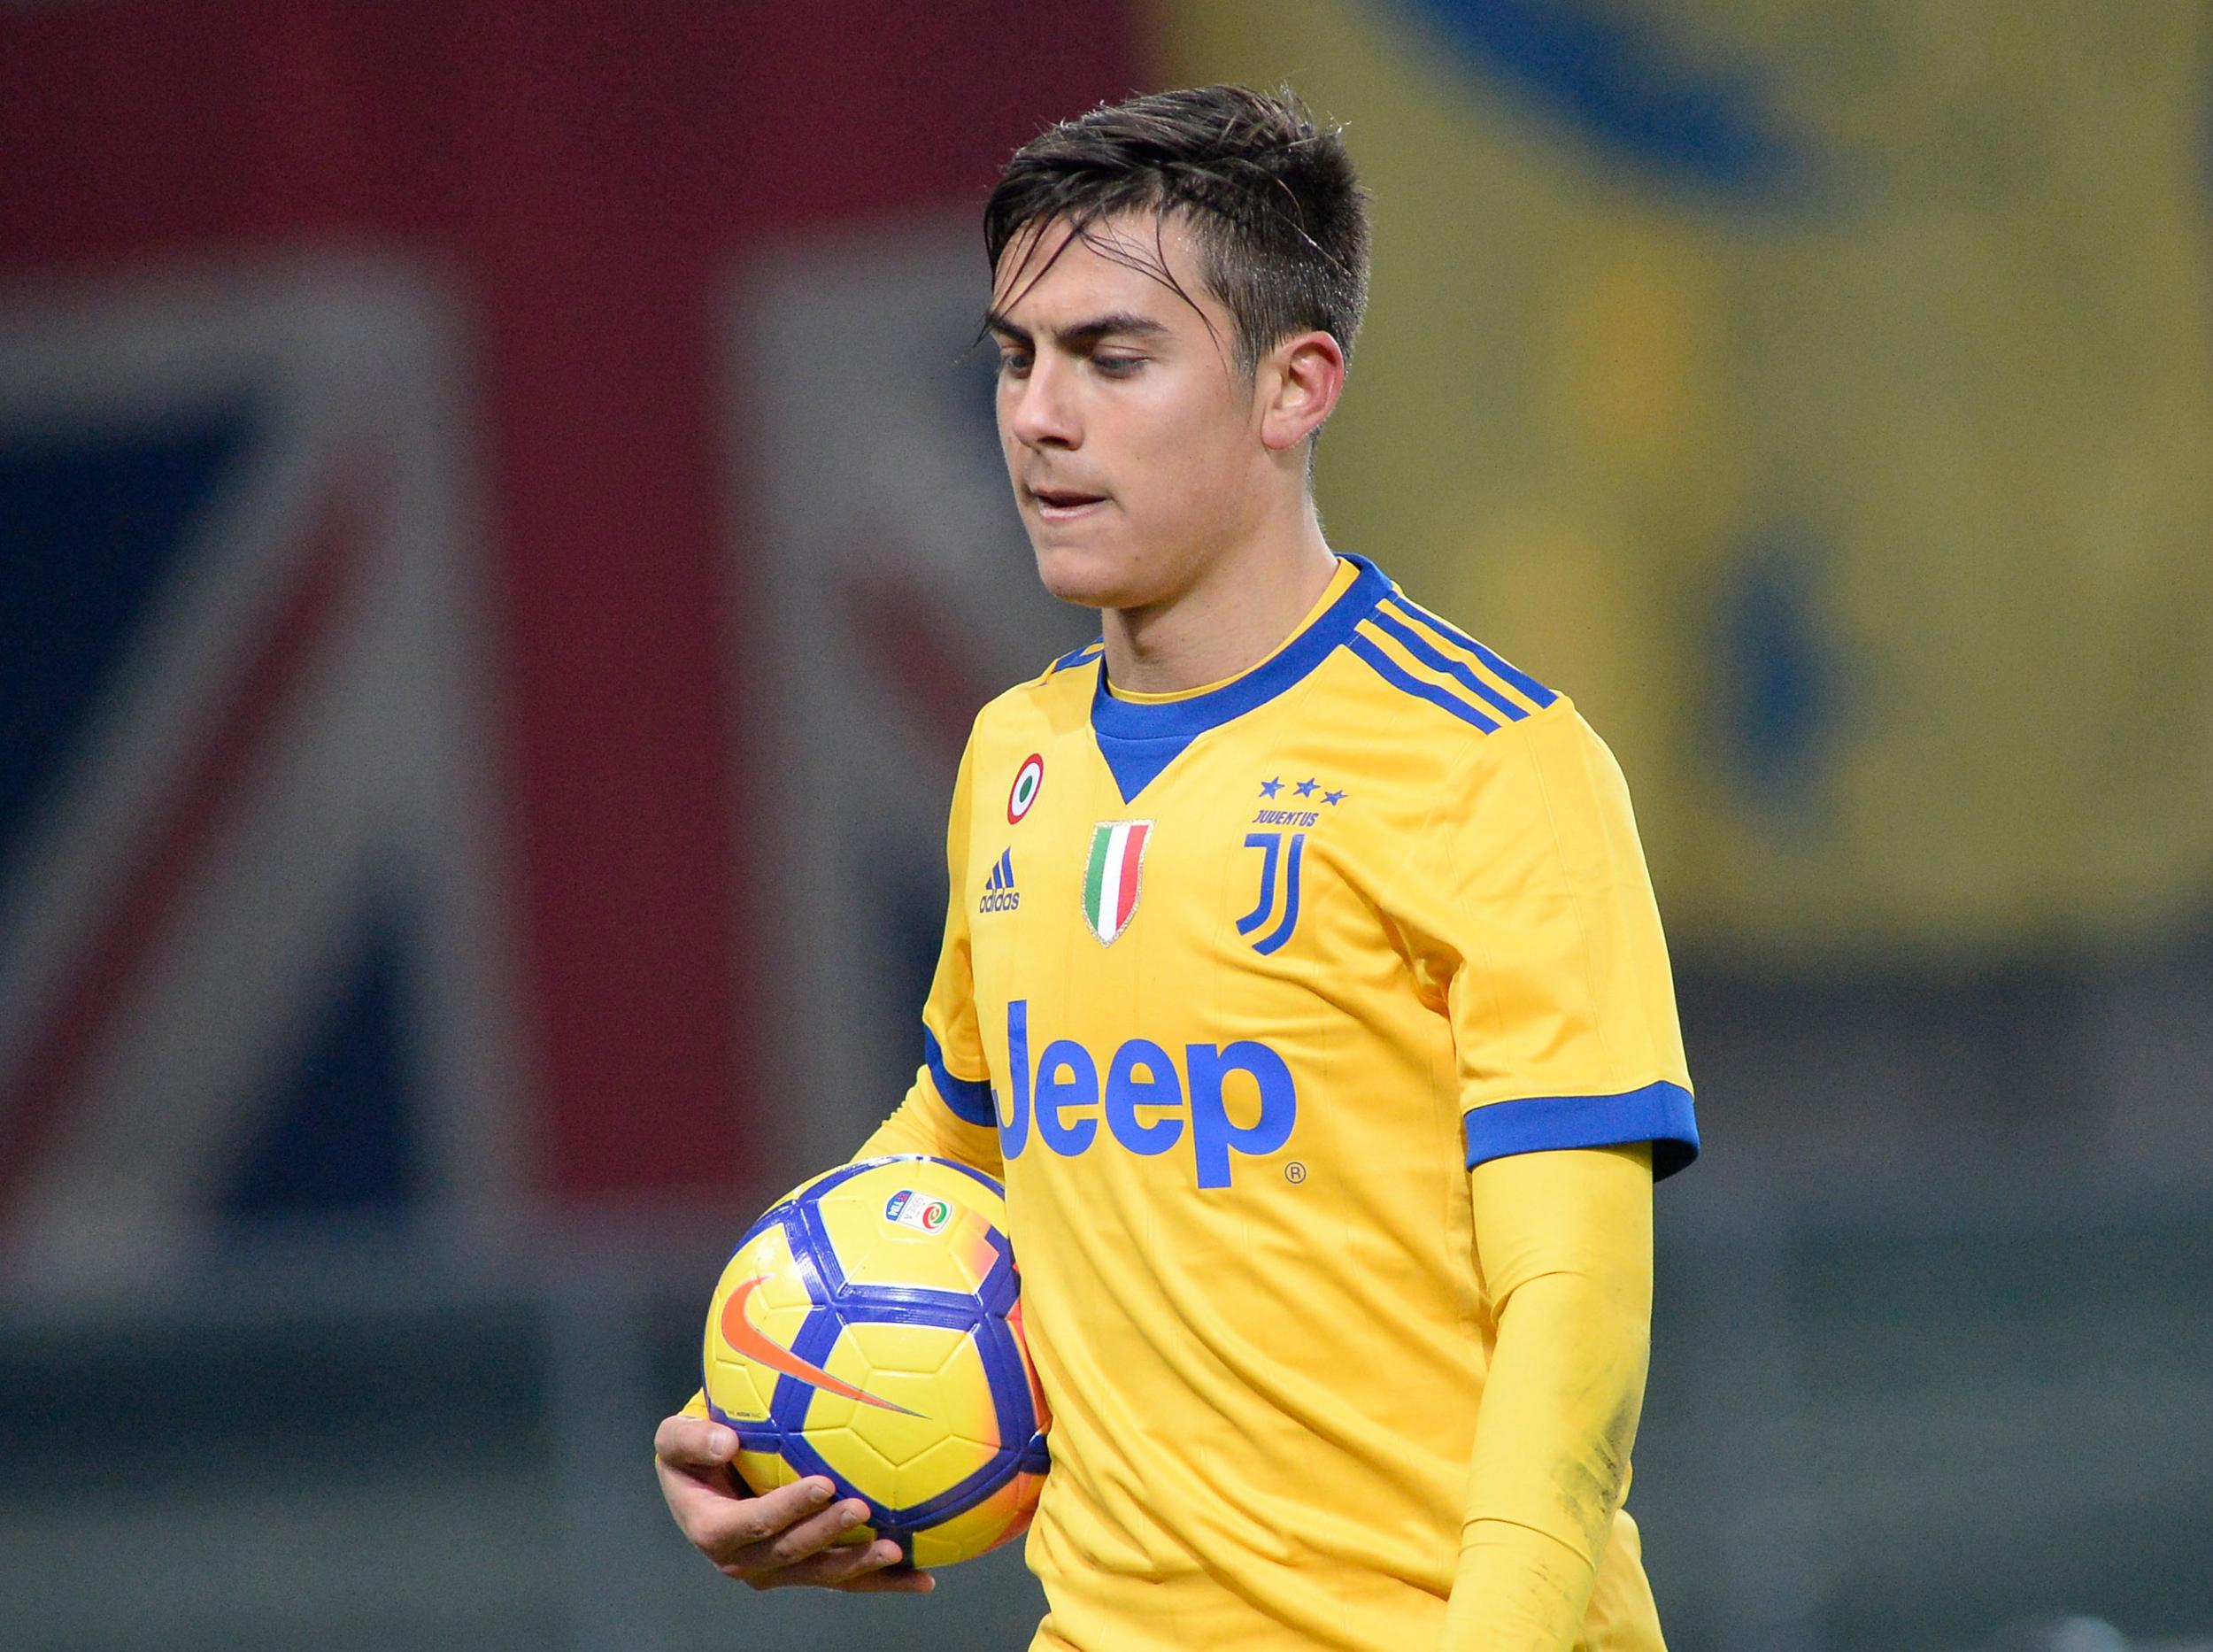 Dybala has endured a turbulent season so far with Juventus after a summer of off-field changes in his personal life